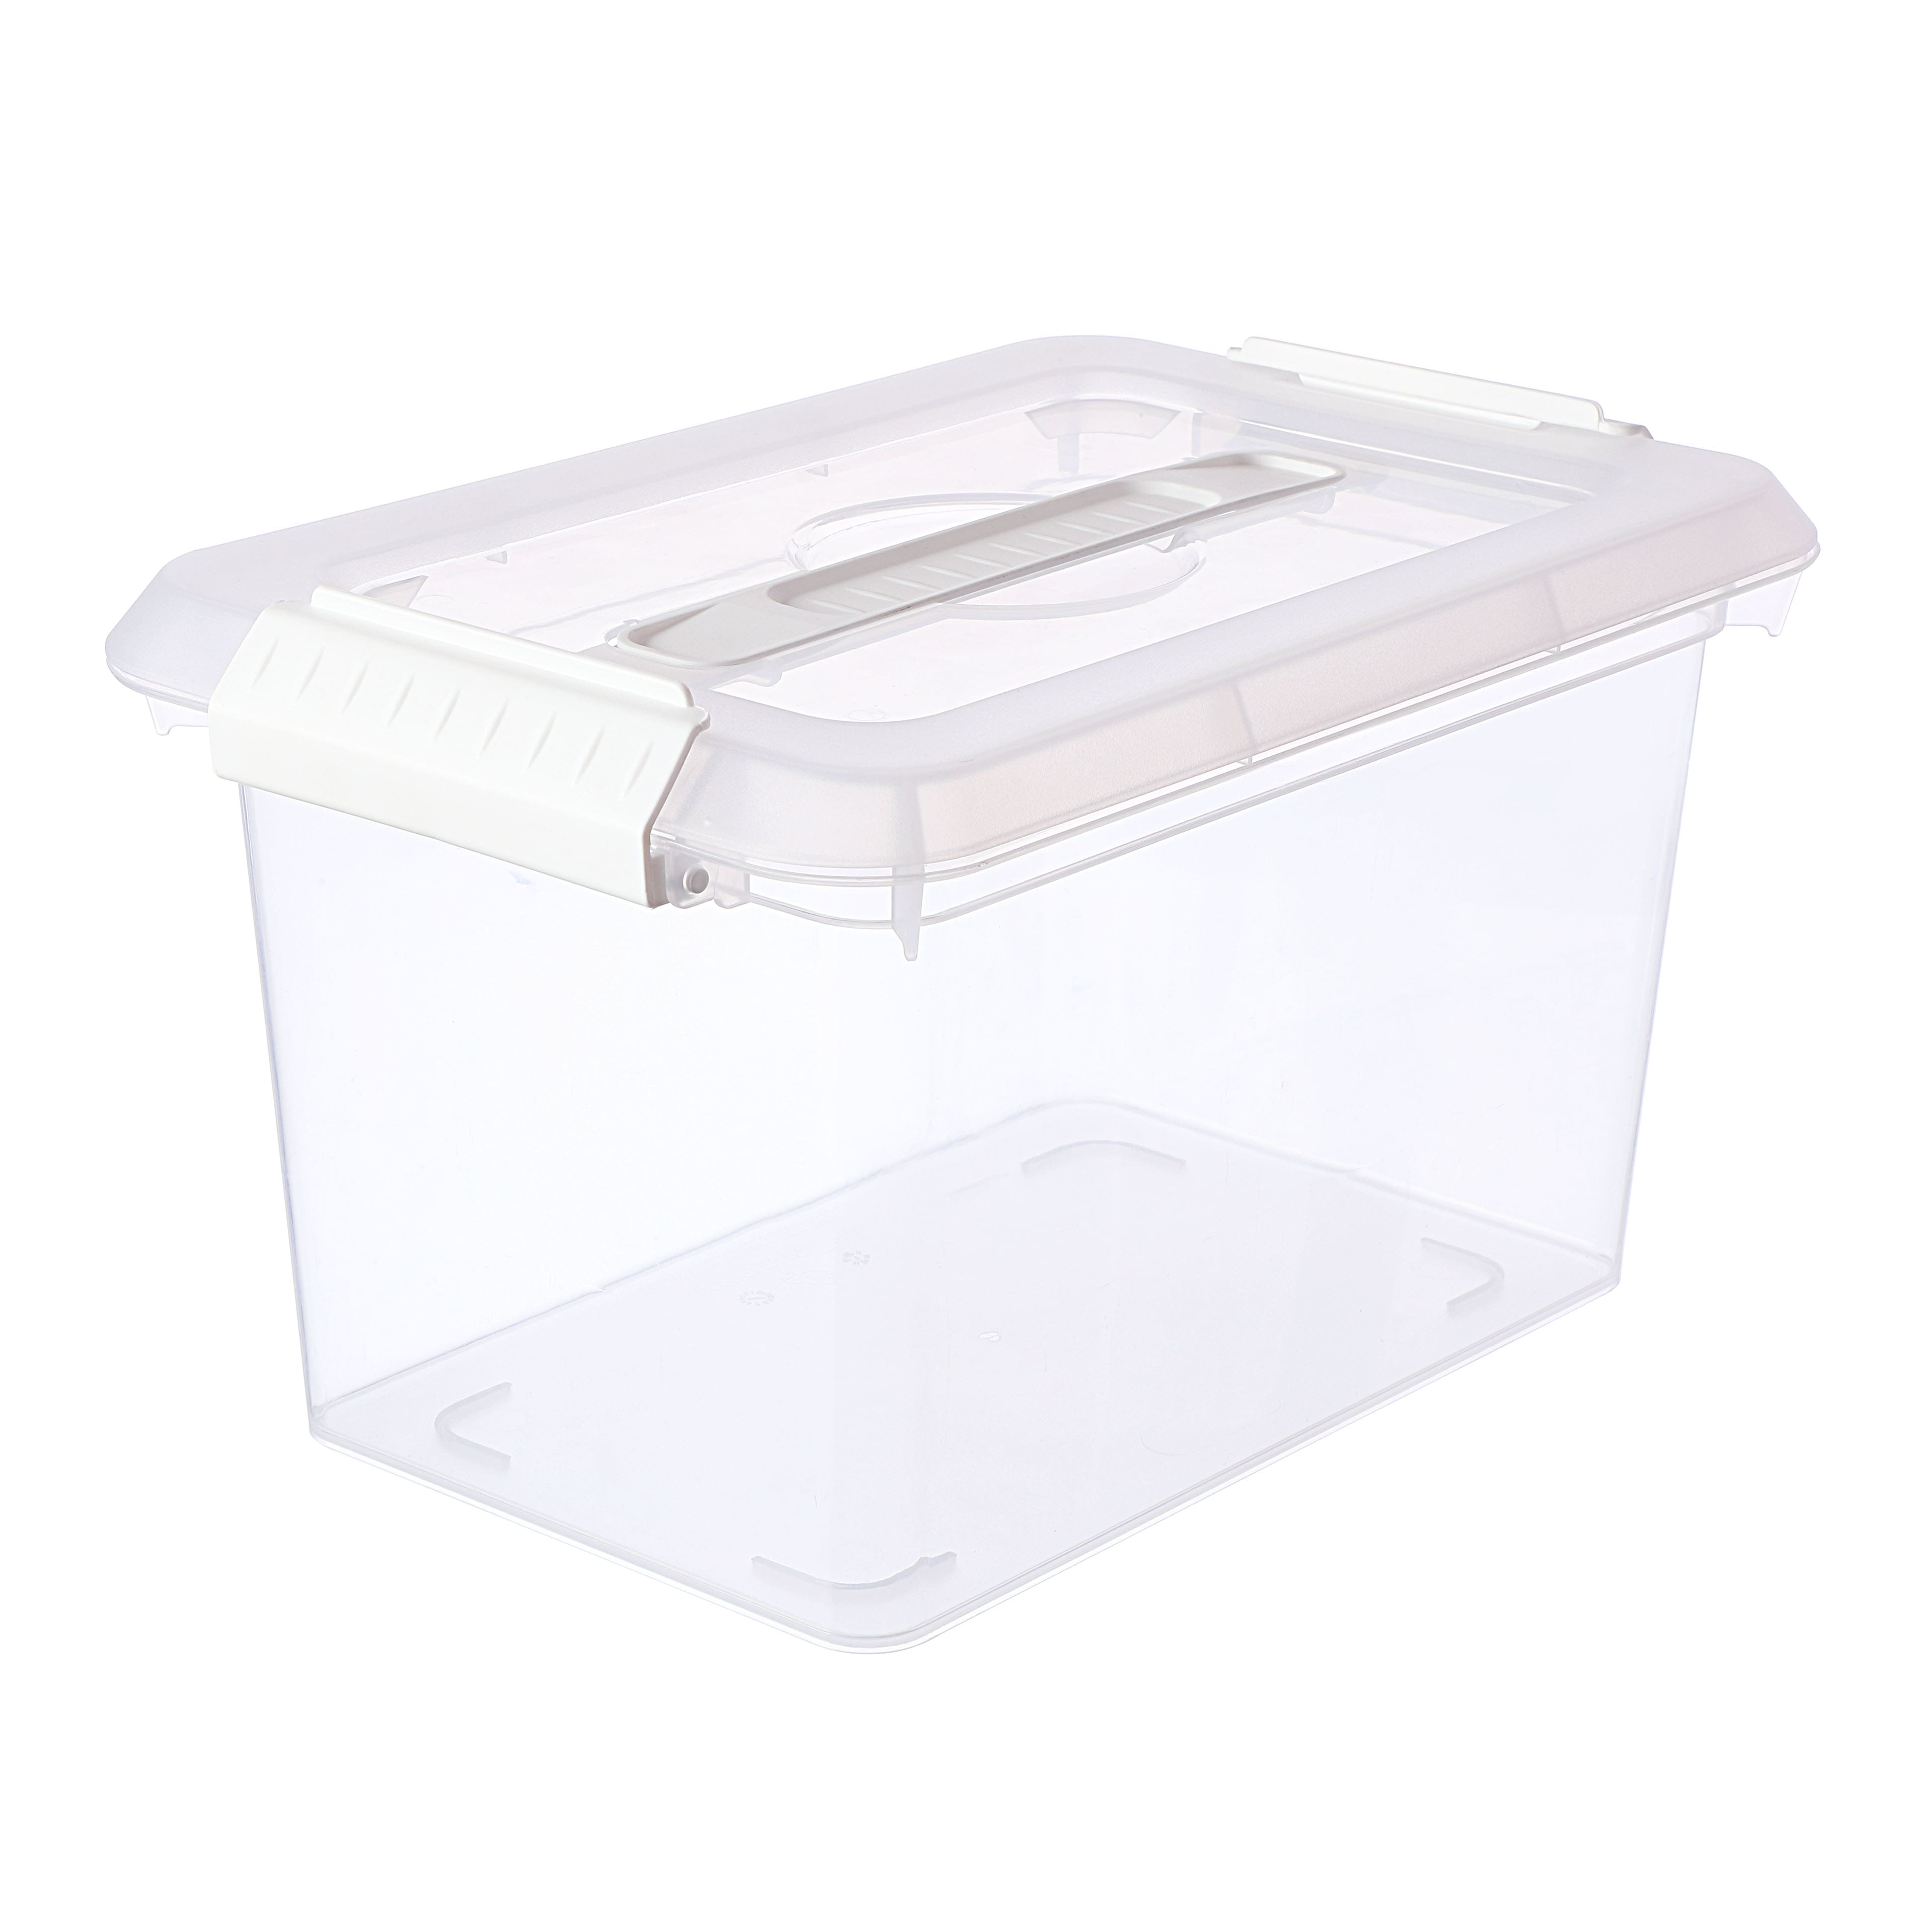 Simply Tidy Storage Bin with Lid - White - 6.2 qt